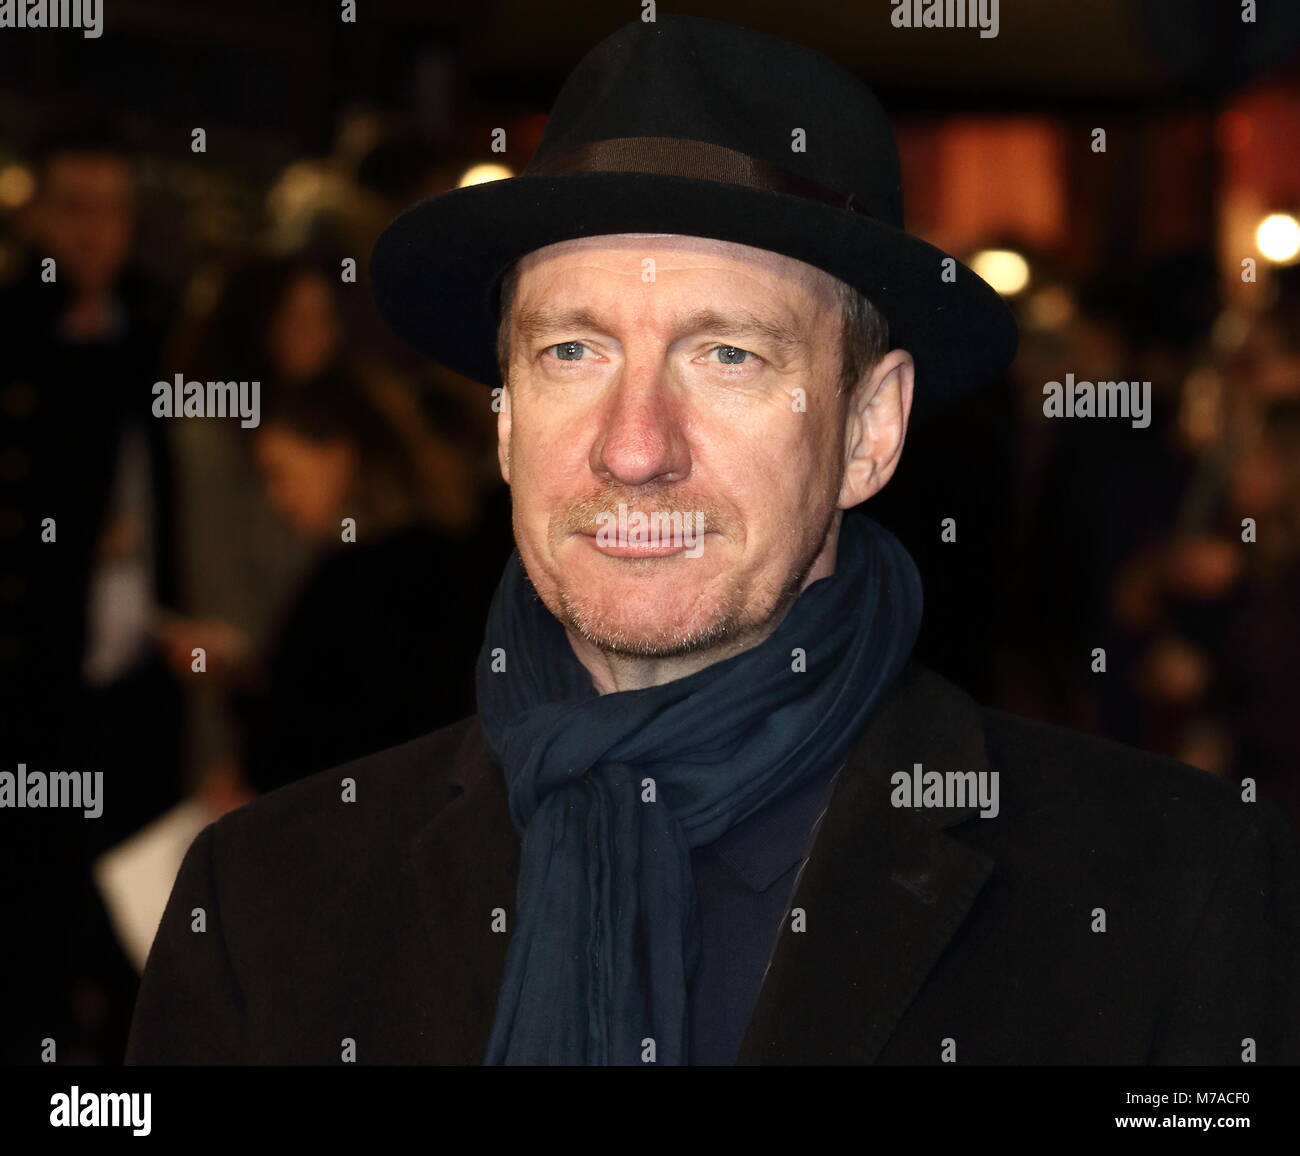 'The Mercy' World Premiere held at the Curzon Mayfair - Arrivals  Featuring: David Thewlis Where: London, United Kingdom When: 06 Feb 2018 Credit: WENN.com Stock Photo